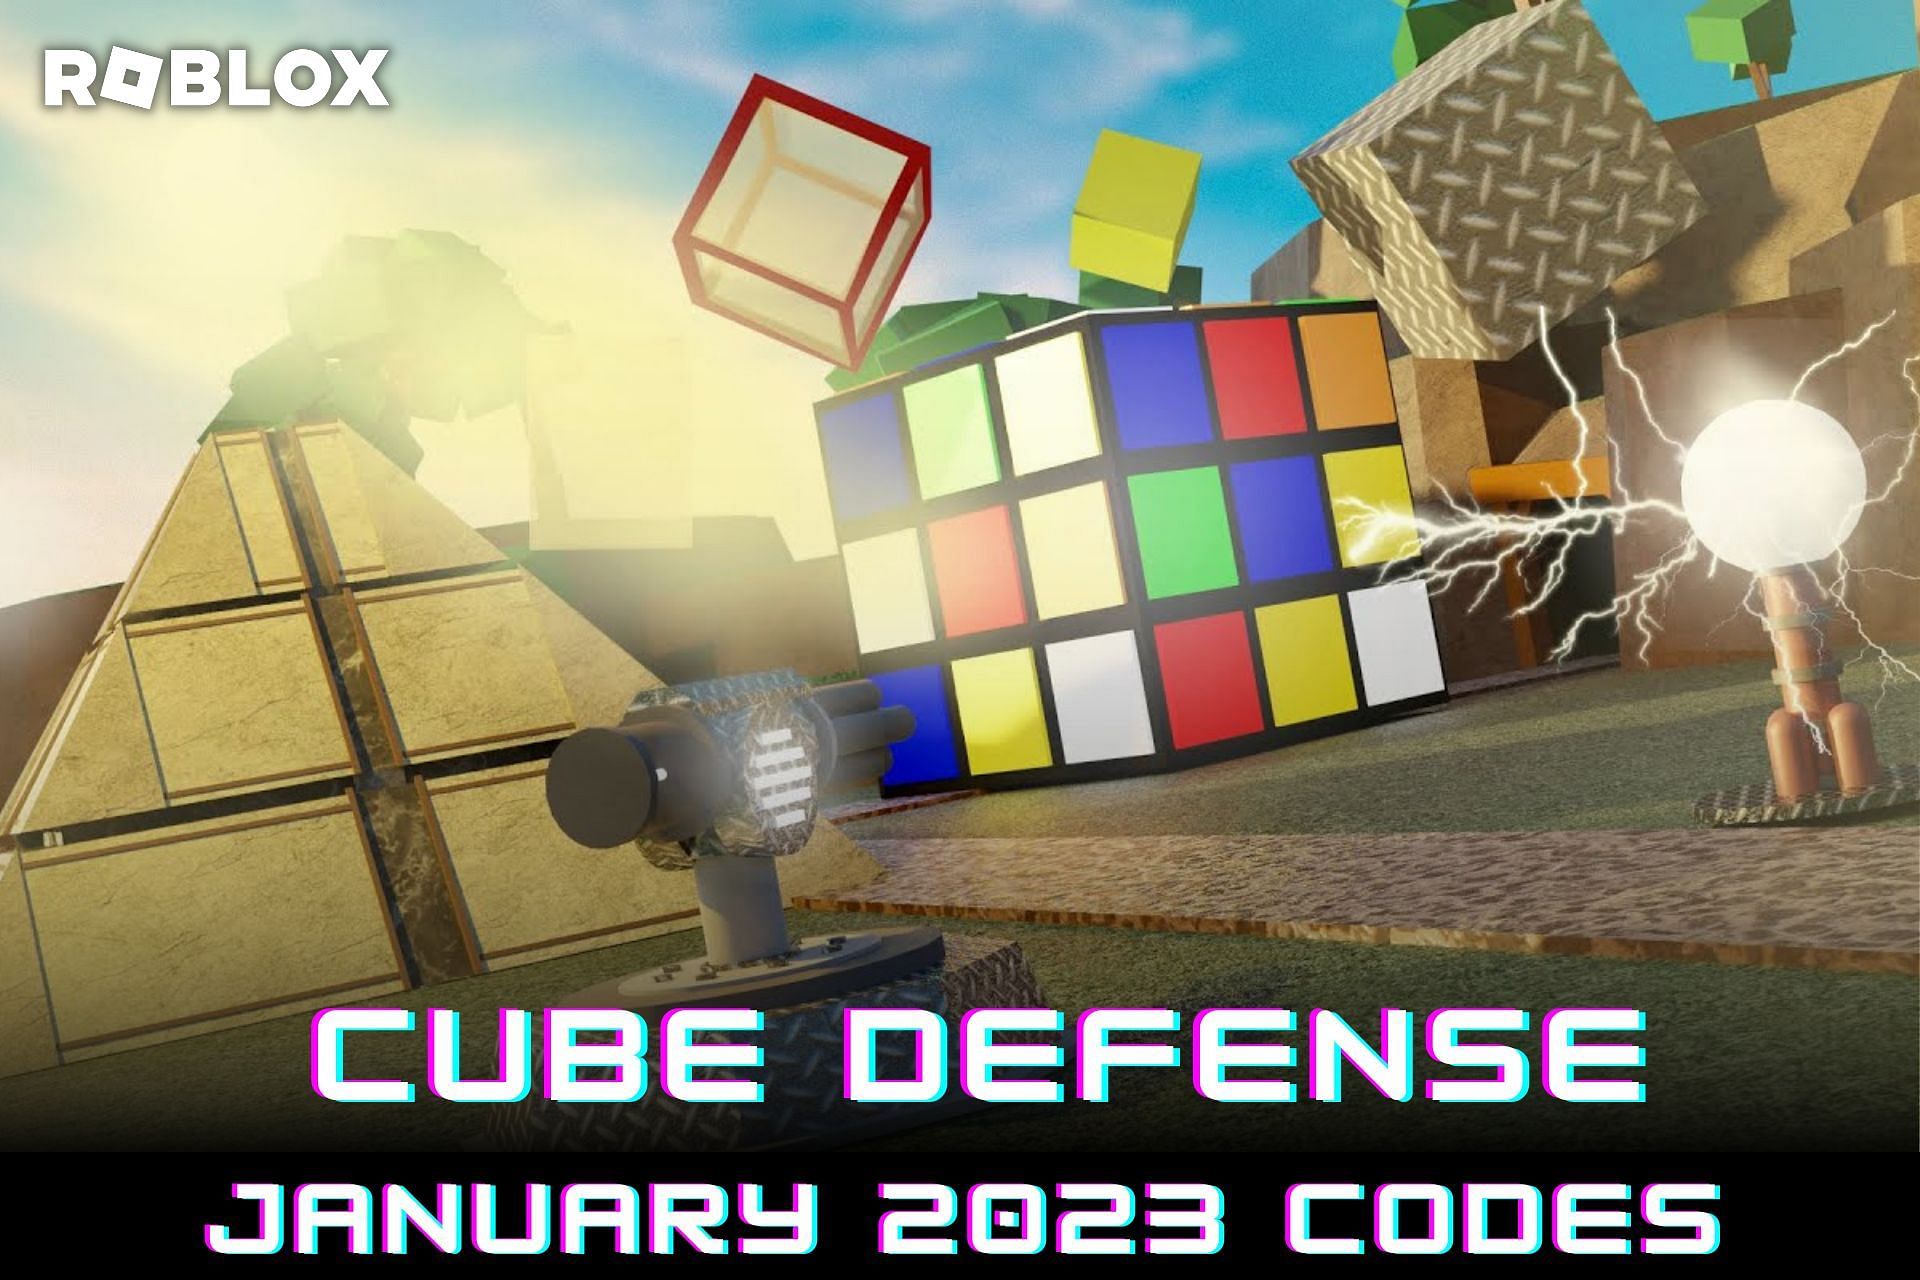 Roblox Tower Defenders codes (November 2022): Free Skins and Shards